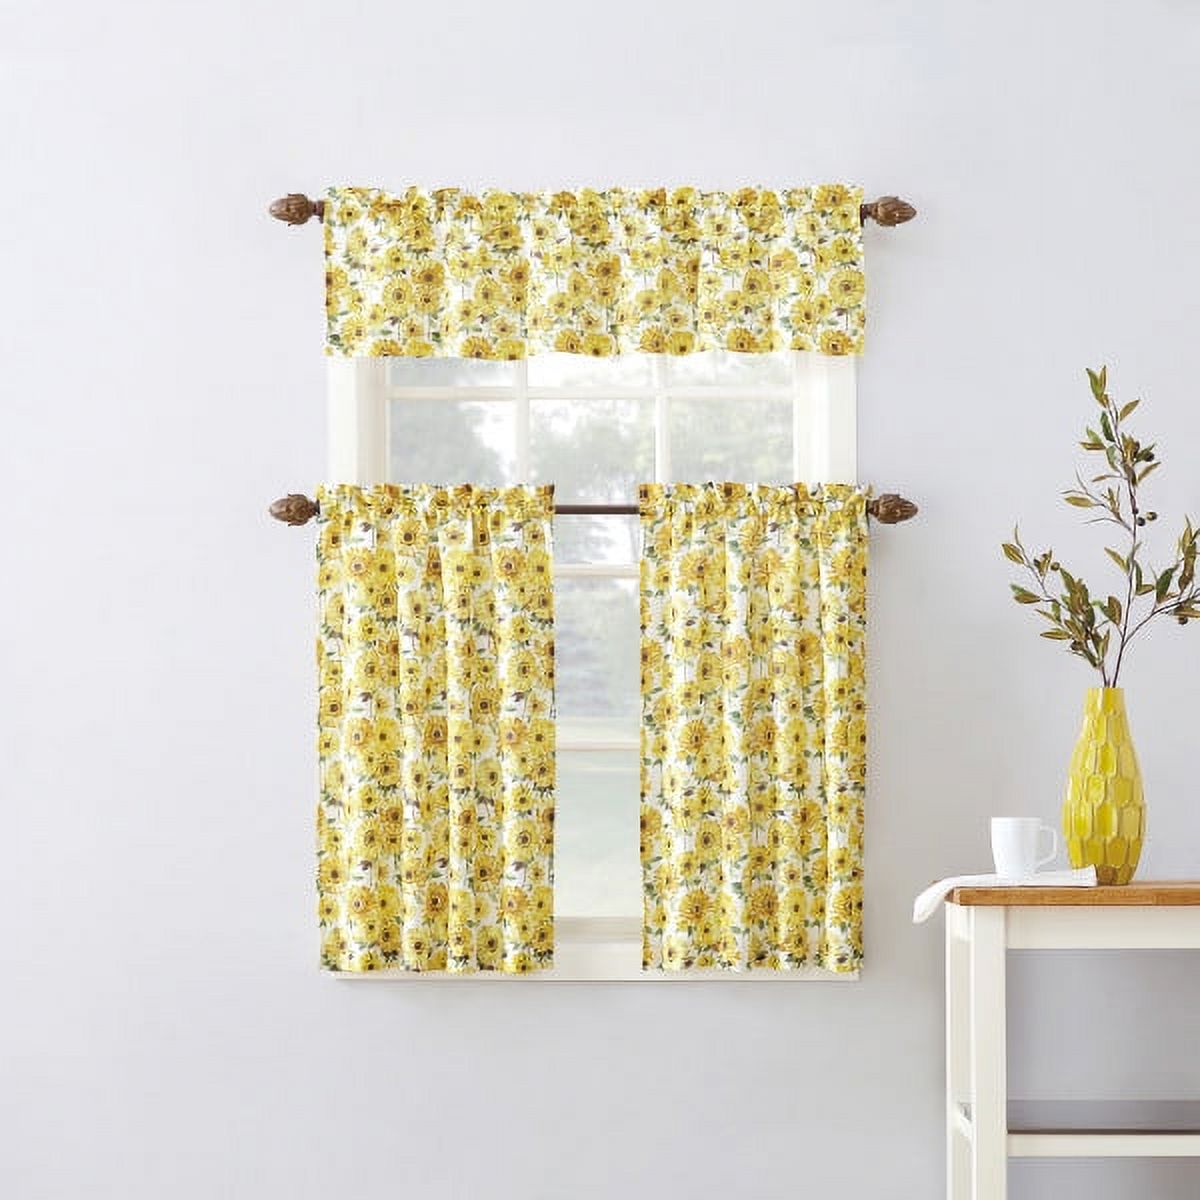 Mainstays Sunflower 3-Piece Kitchen Curtain Tier and Valance Set 54"x 36" in Multi - image 1 of 4